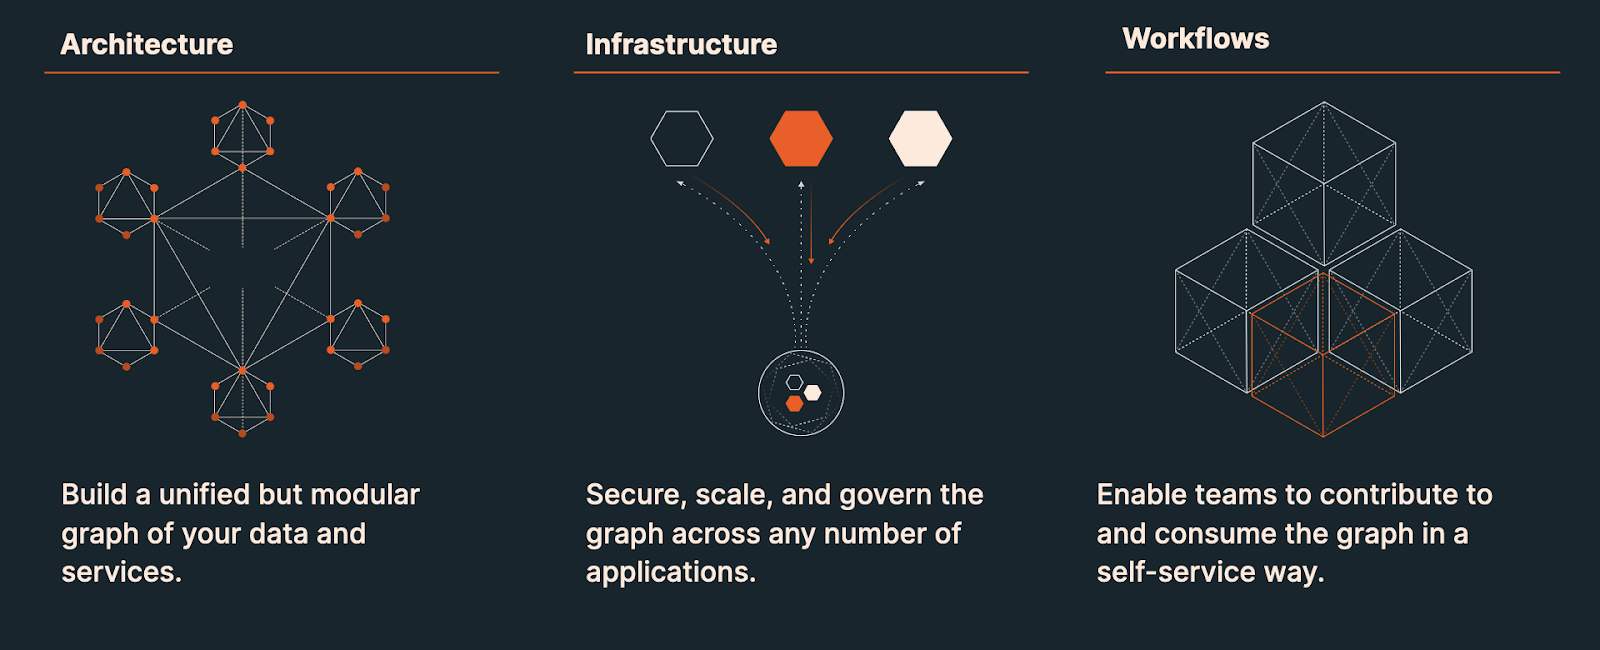 Image portrays three visuals. The first visual is on GraphQL architecture and includes text that reads build a unified but modular graph of your data and services. The second visual showcases GraphQL infrastructure and includes text that reads Secure, scale, and govern the graph across any number of applications. The third visual showcases GraphQL workflows and includes text that reads enable teams to contribute to and consume the graph in a self-service way.